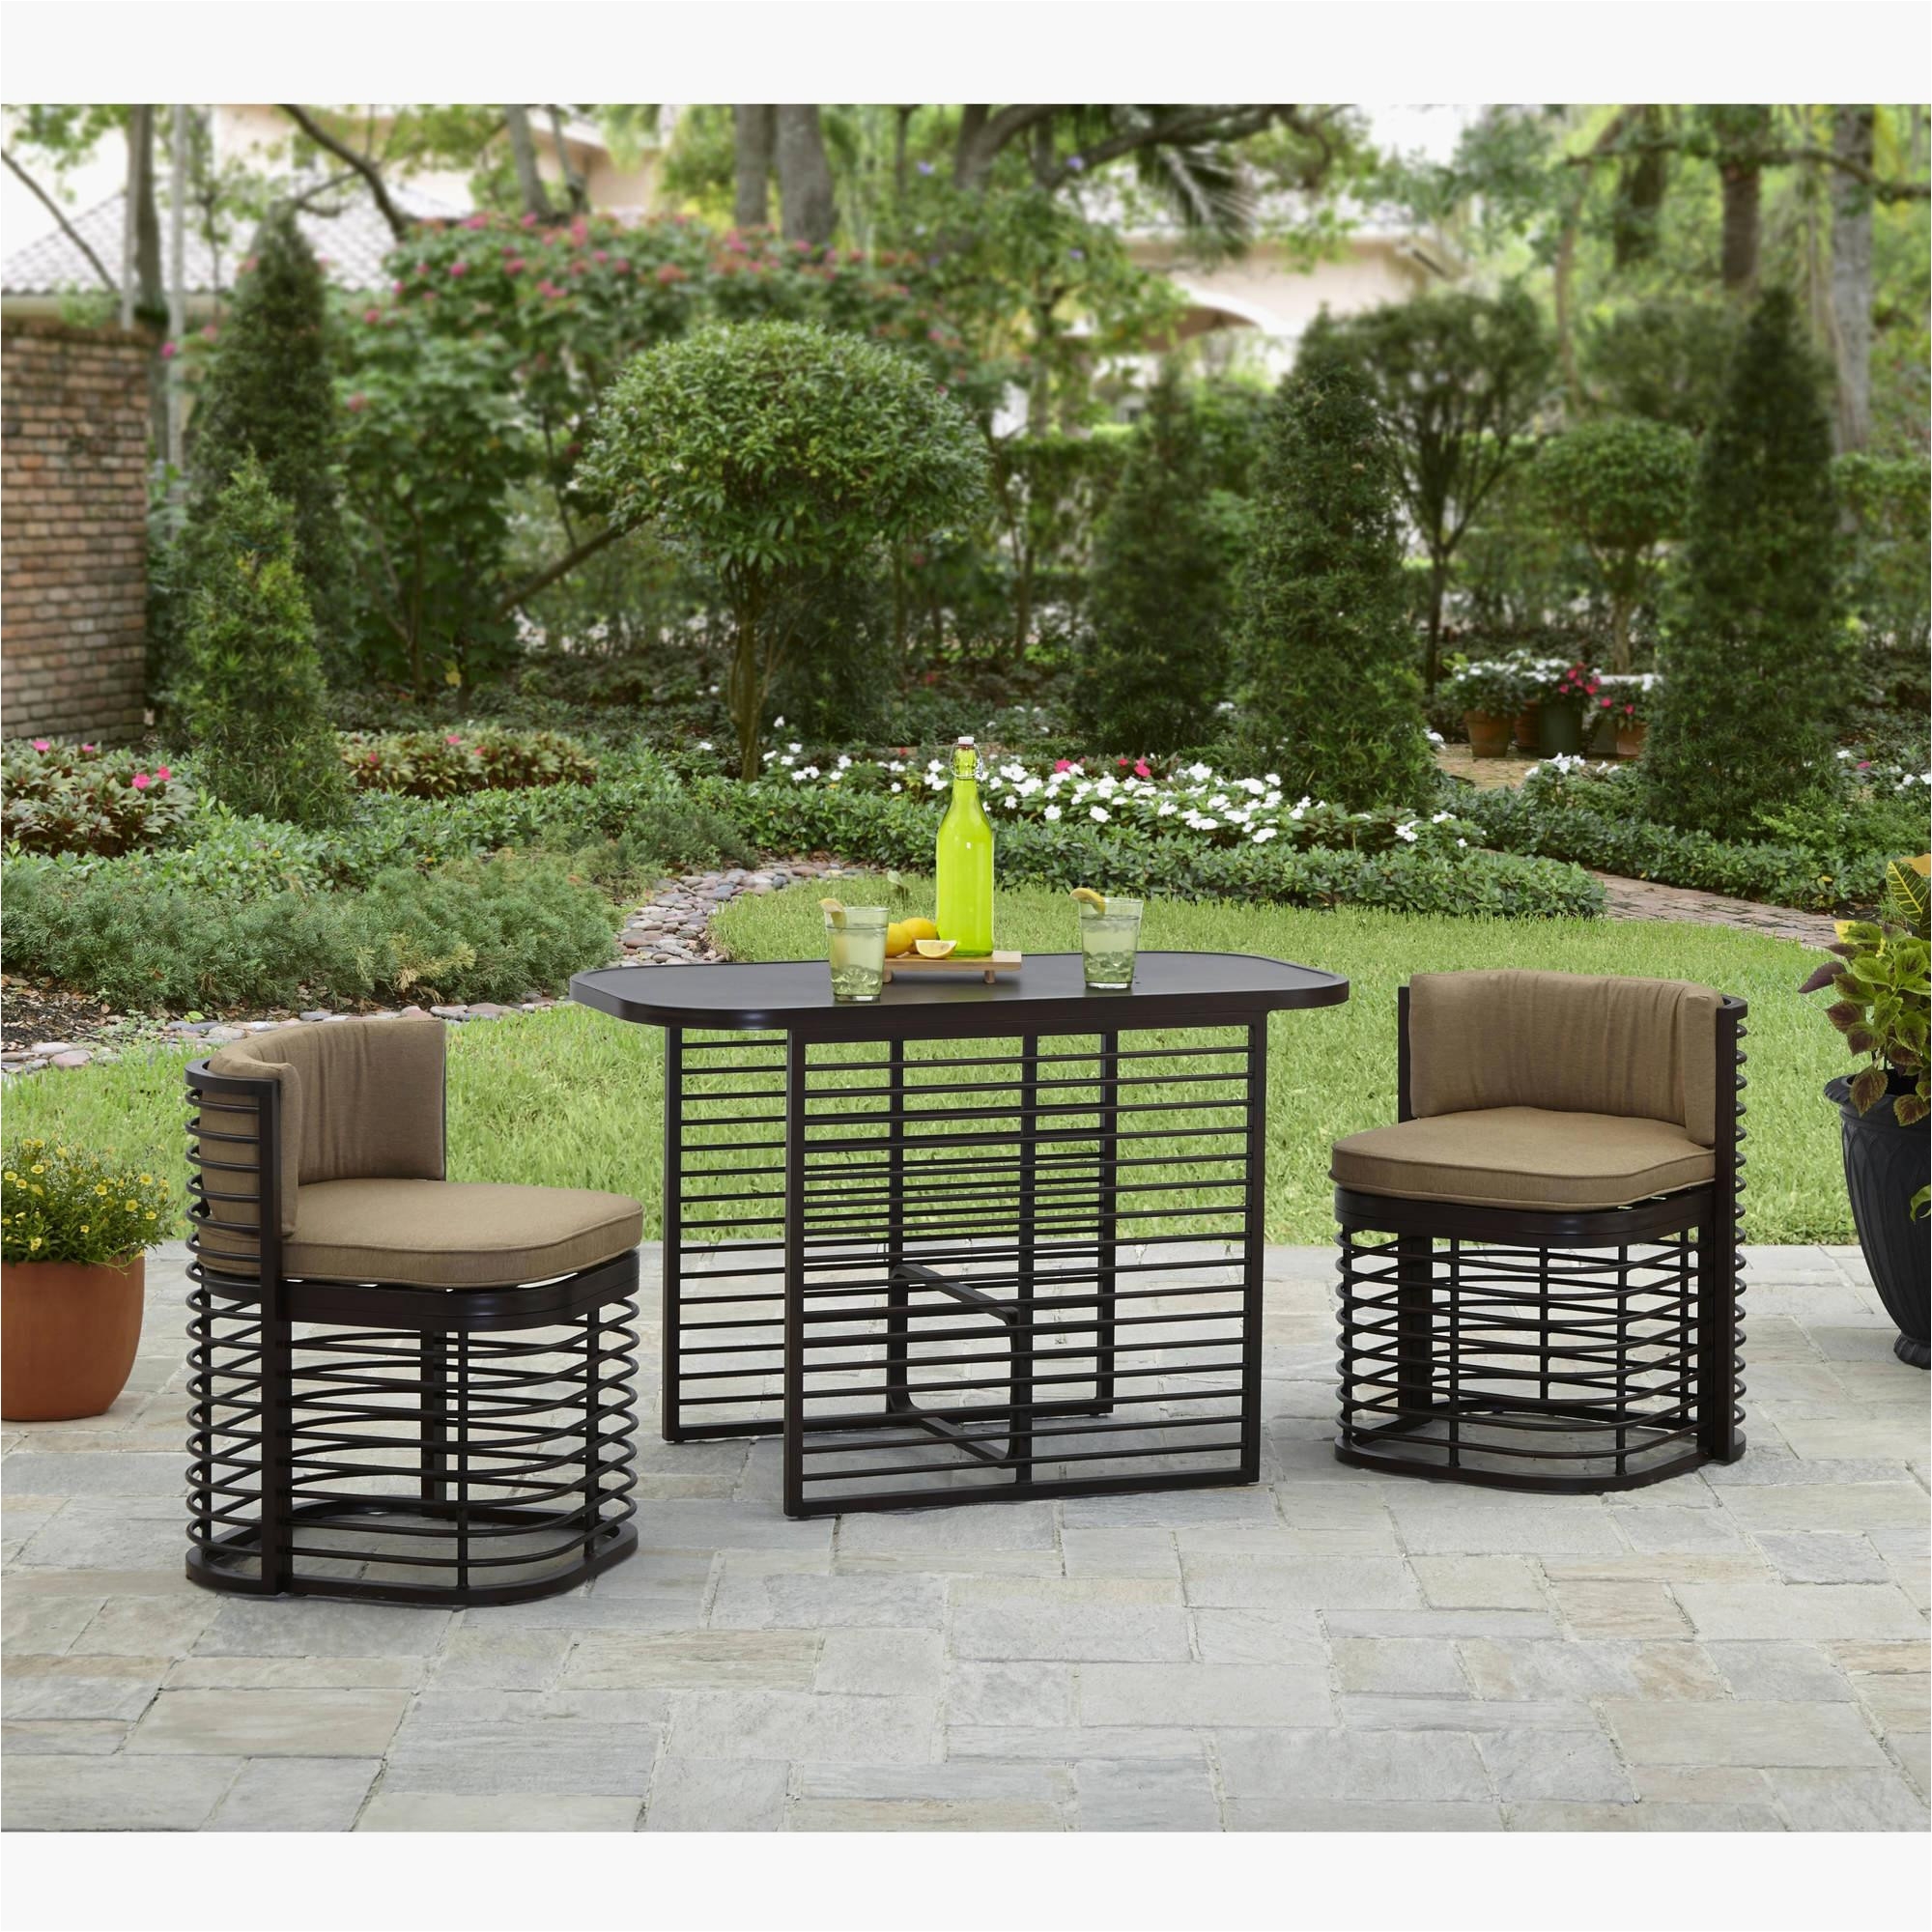 fred meyer outdoor furniture new 36 beautiful hd designs outdoor furniture pictures of fred meyer outdoor